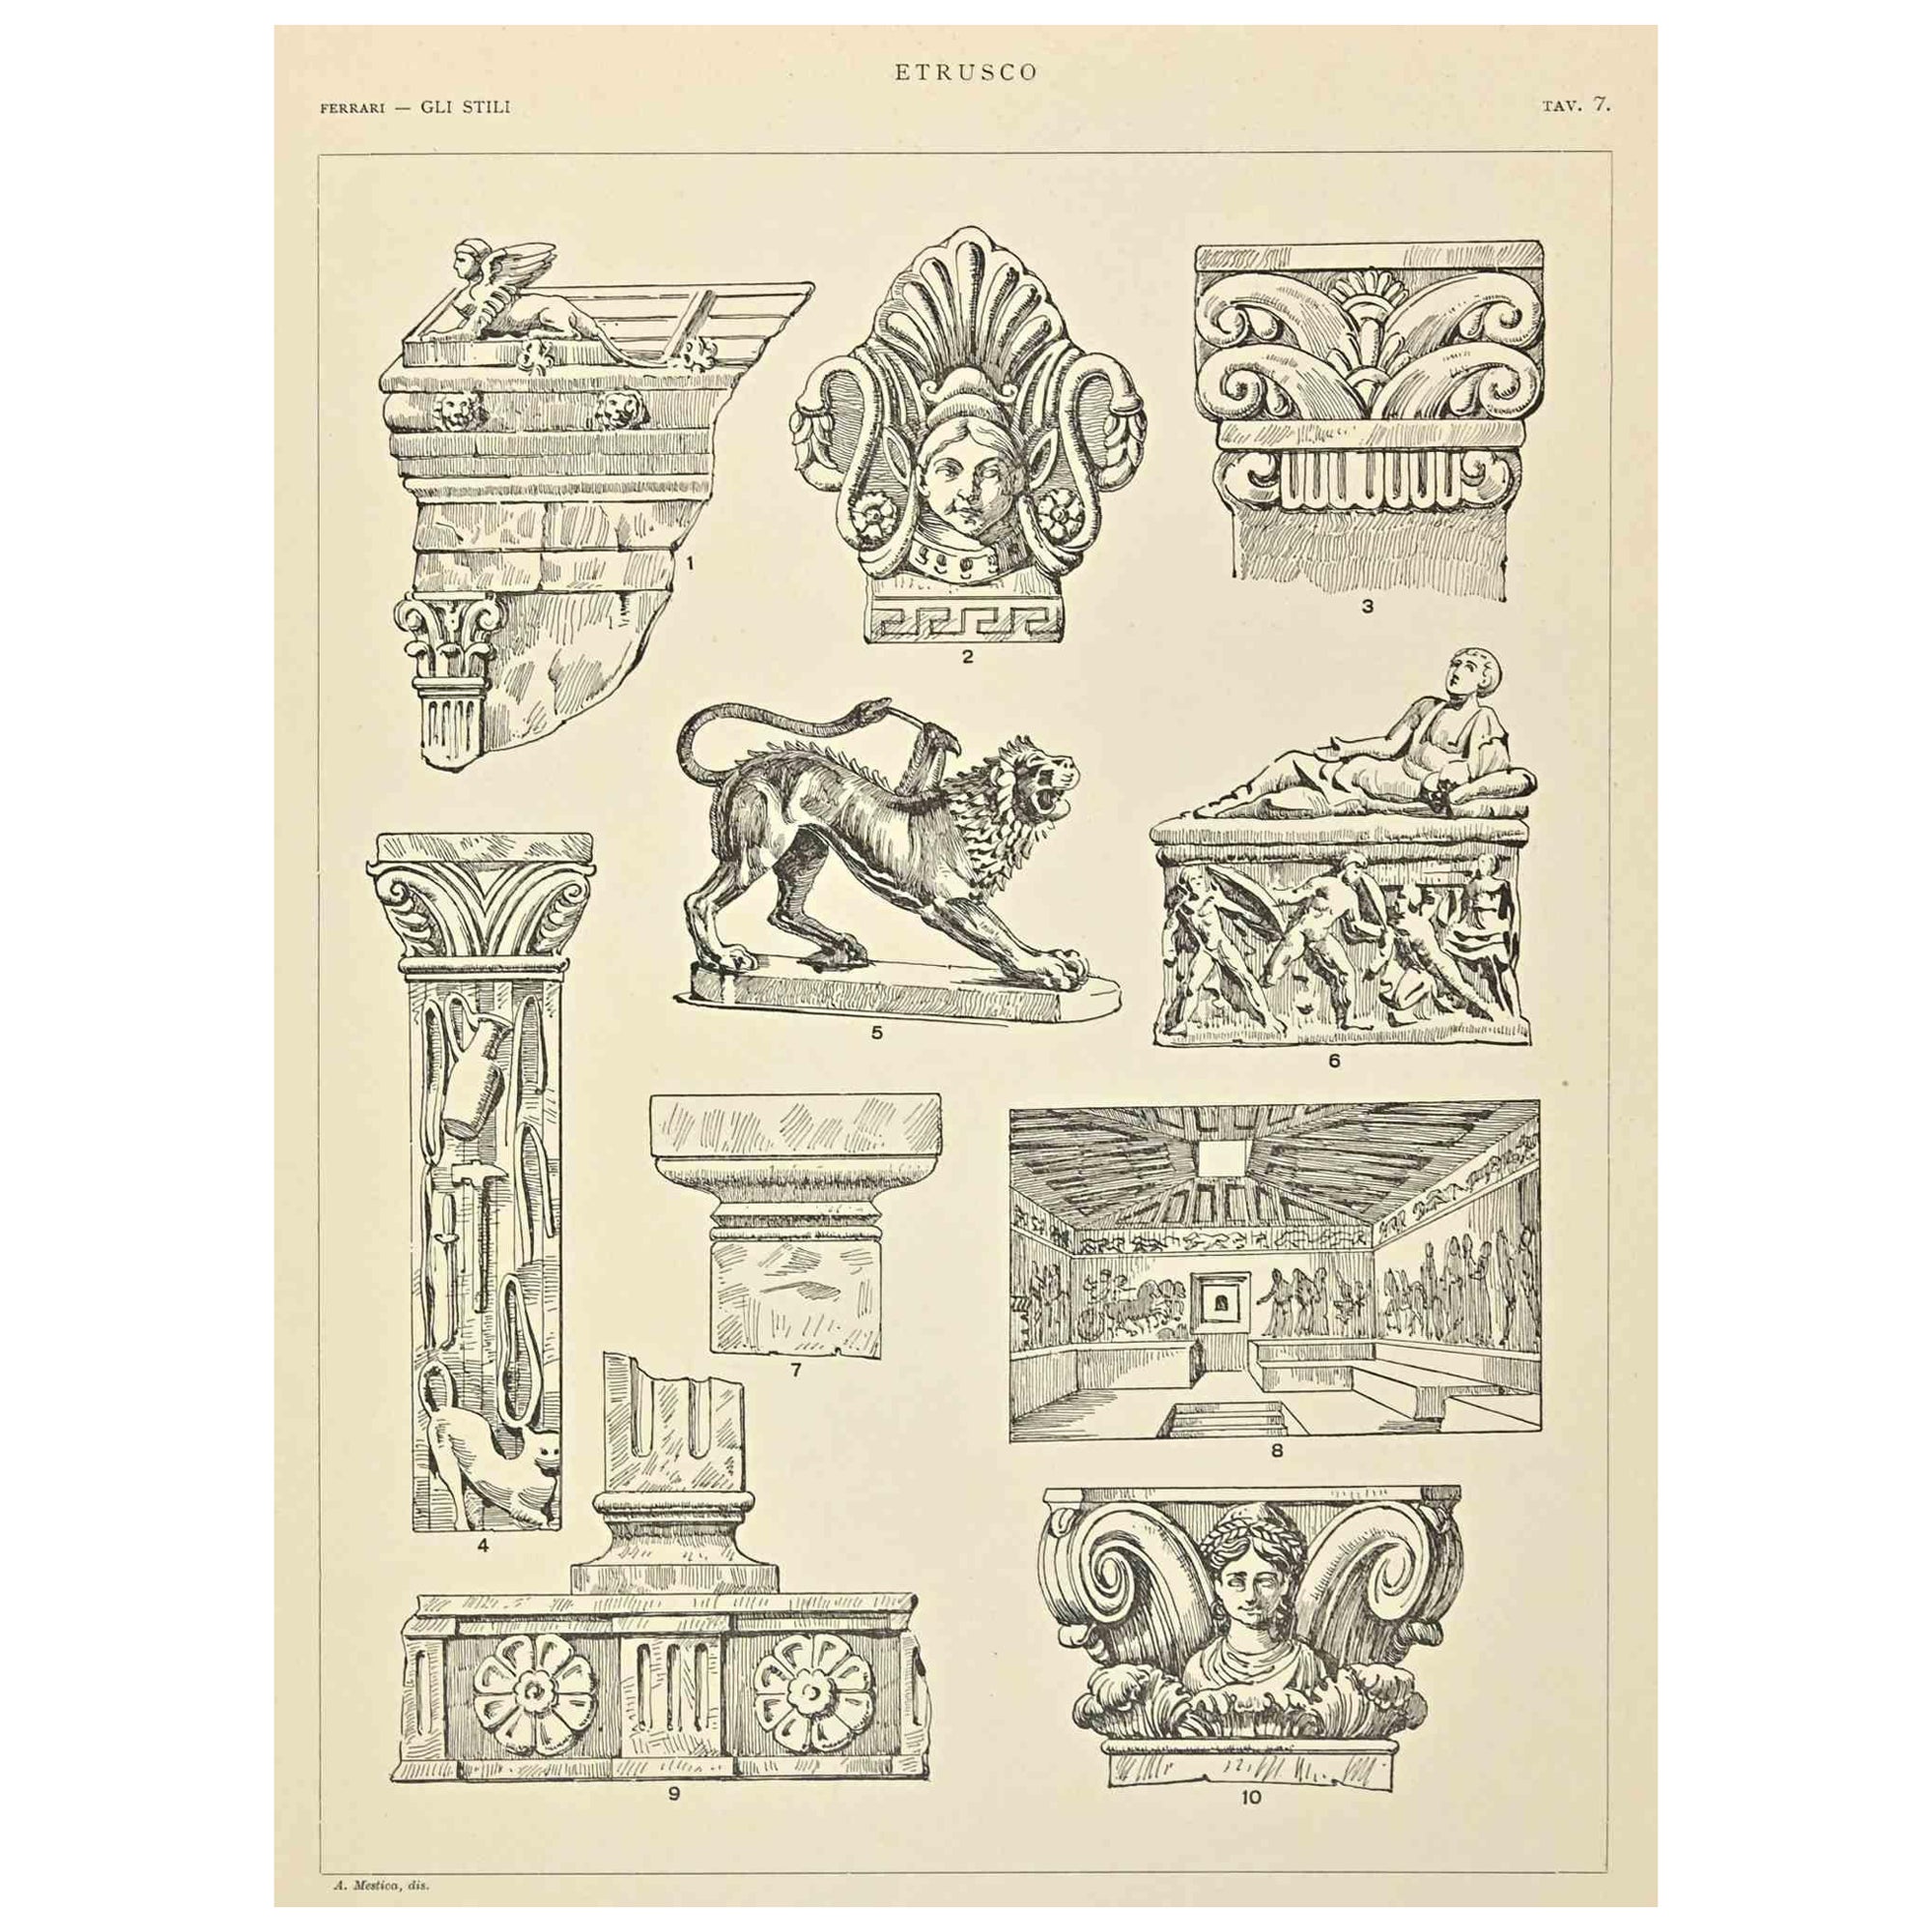 Etruscan  Decorative Style is a print on ivory paper realized by Andrea Alessio in the early 20th Century.

Signed on the plate on the lower.

Vintage lithograph.

Very good conditions.

The artwork represents Decorative motifs through well-defined